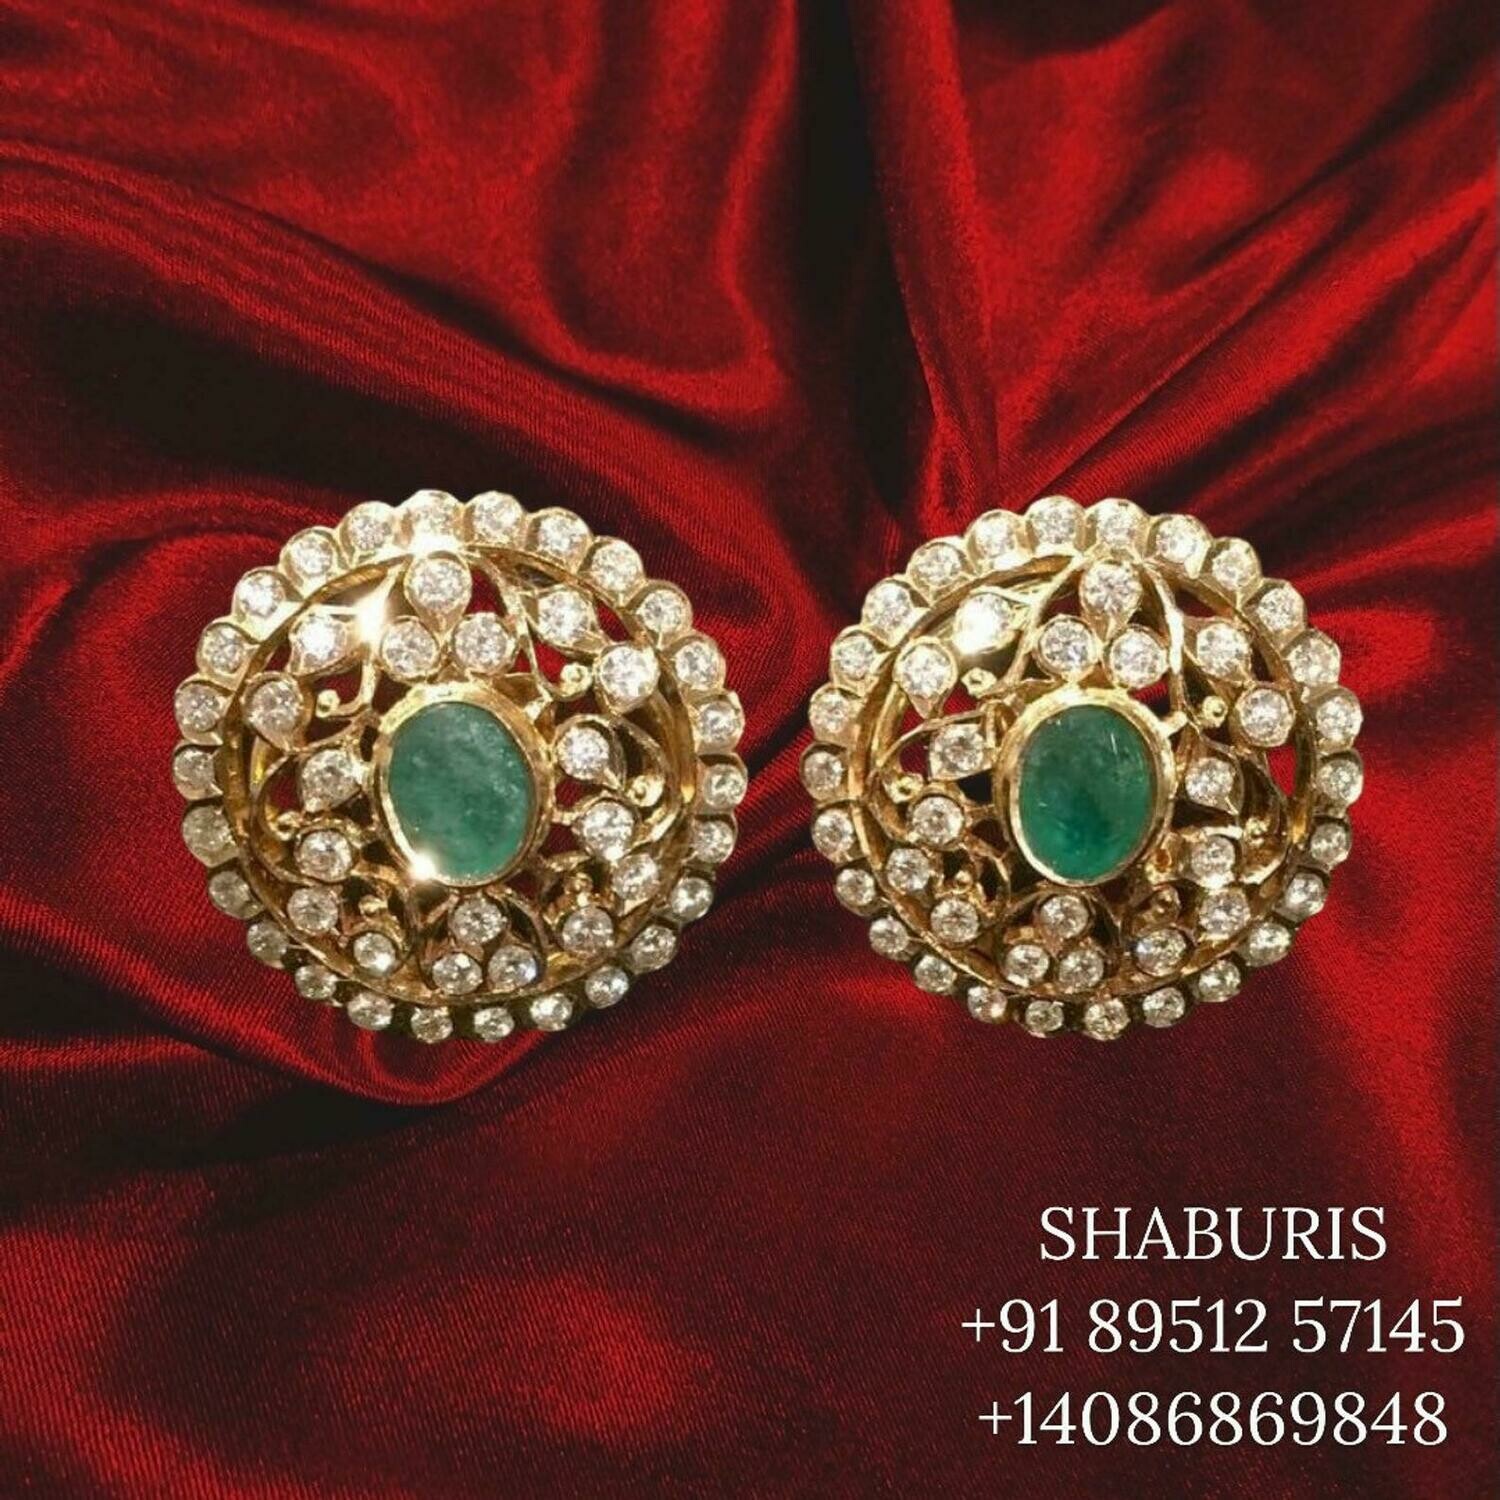 Pure Silver Jewellery Indian,Big Indian Studs,Moissanite Studs,Indian Bridal,Indian Wedding Jewelry,pure Silver jewelry-NIHIRA-SHABURIS